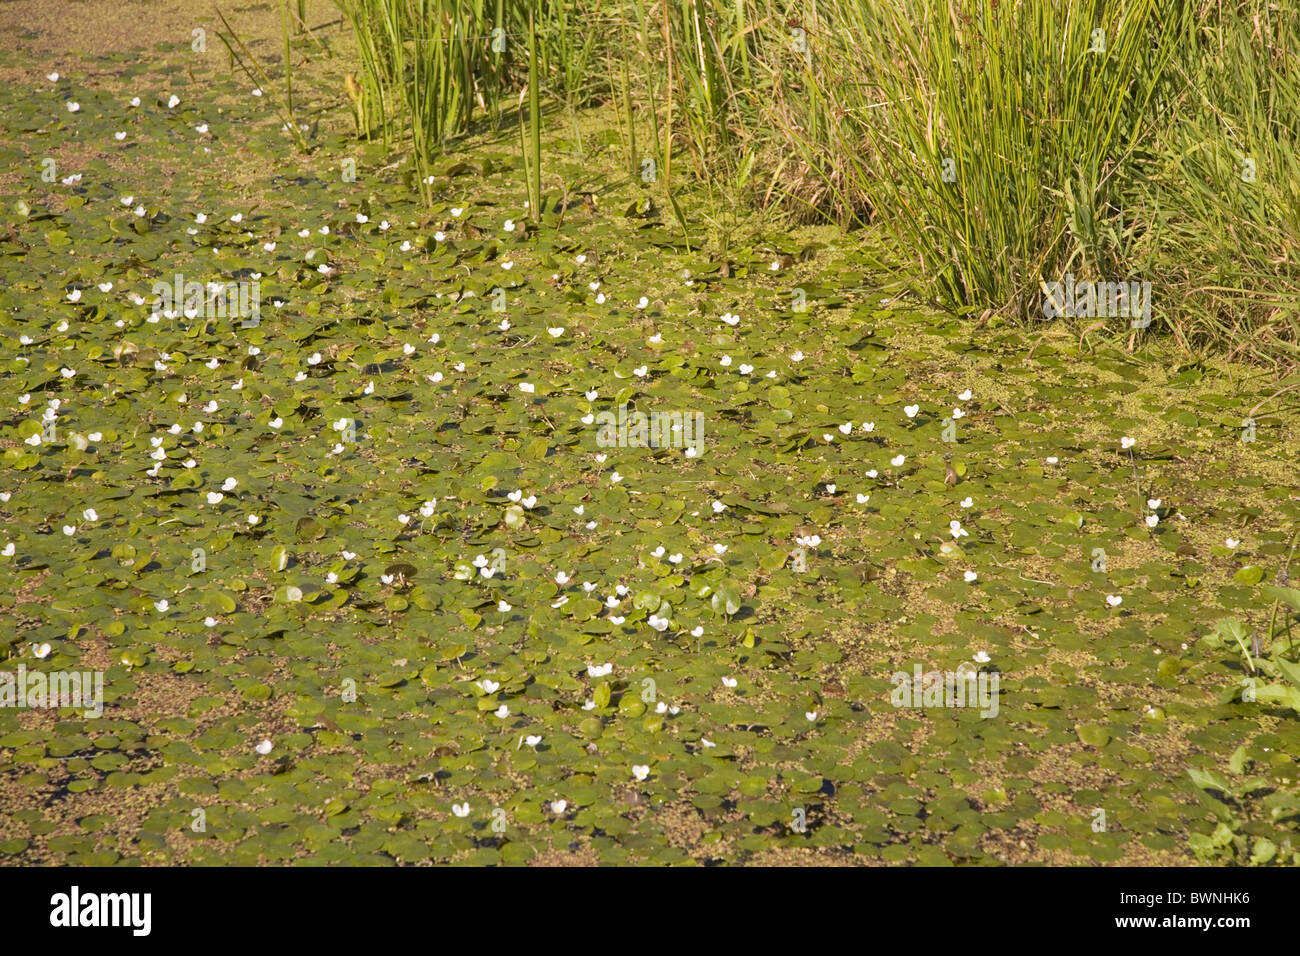 Ditch covered with flowering Frogbit (Hydrocharis morsus-ranae), Bleskensgraaf, South-Holland, Netherlands Stock Photo